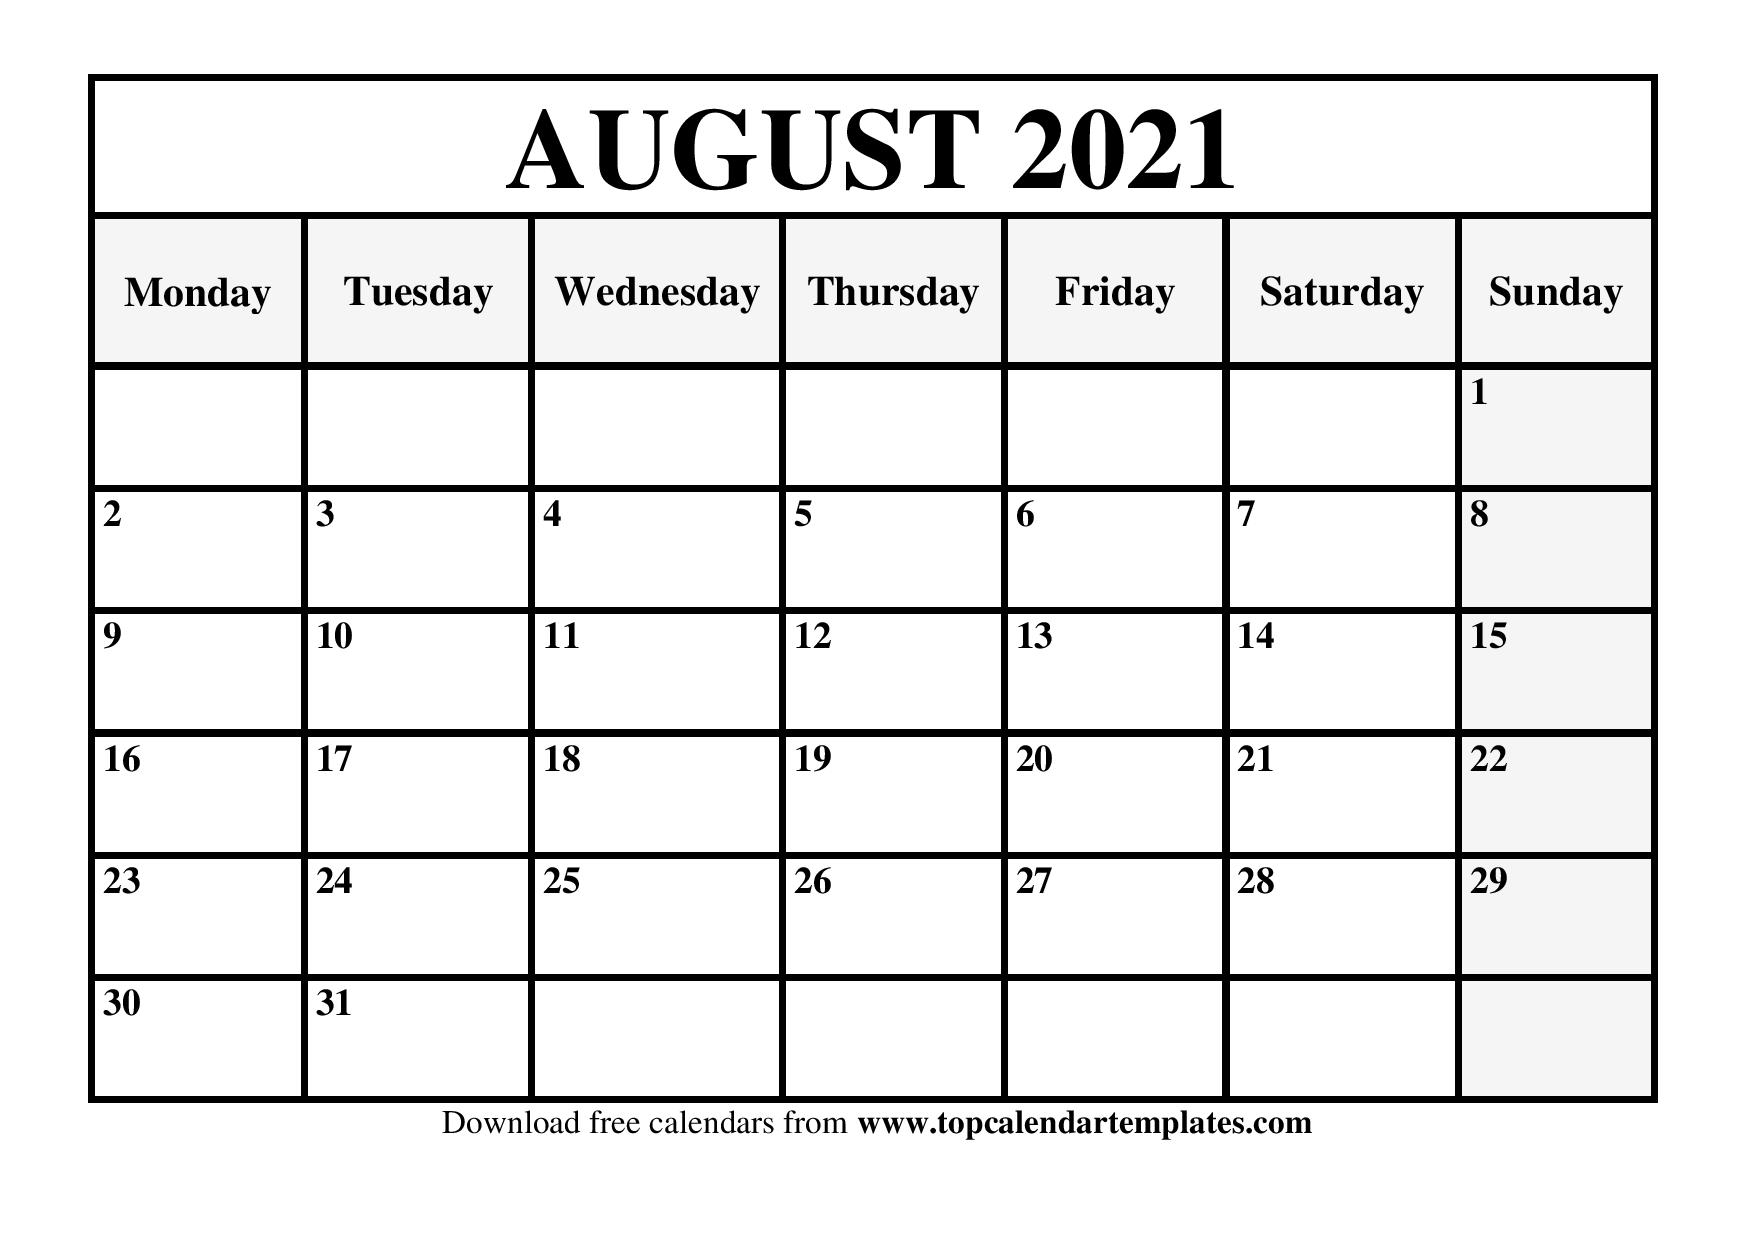 August 2021 Printable Calendar - Monthly Templates